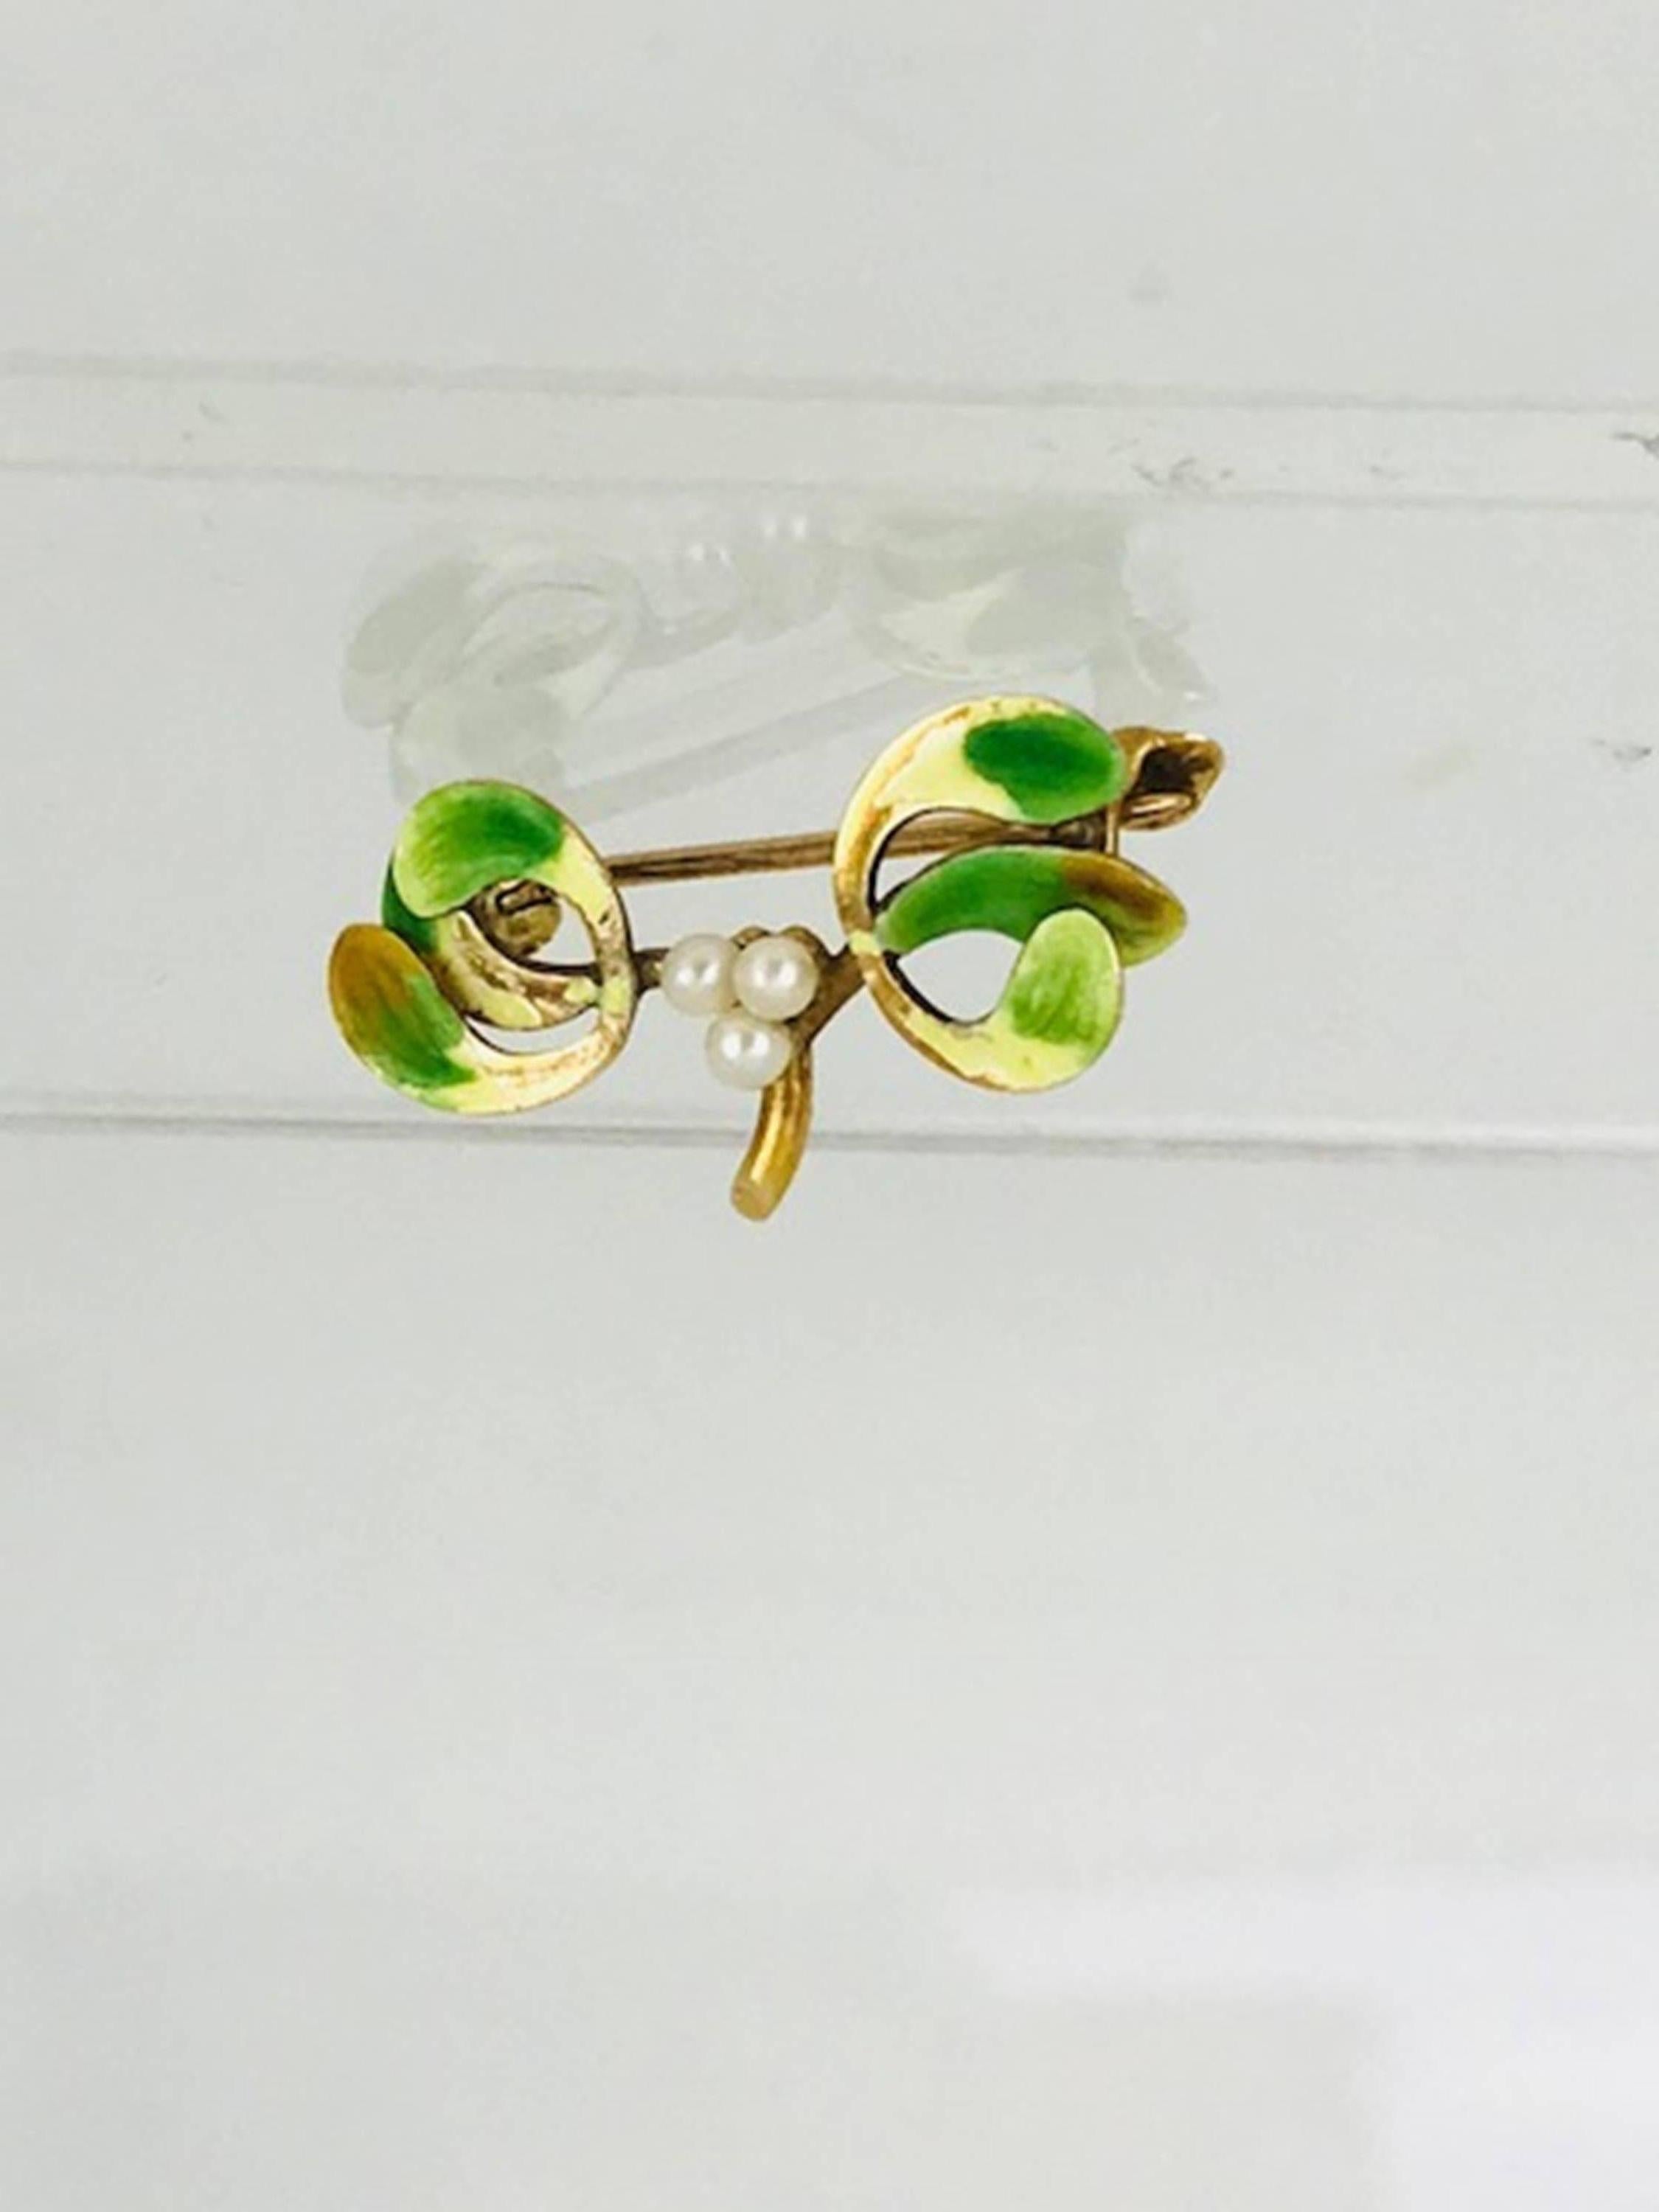 Yellow Gold based, Victorian Enamel Pin. The center consists of three matching, beautiful luster pearls 2.00 millimeters in diameter, tear-dropped in shape. 
The pin's enamel coloring is Granny Apple Color's of green. 
The pin's measurements are